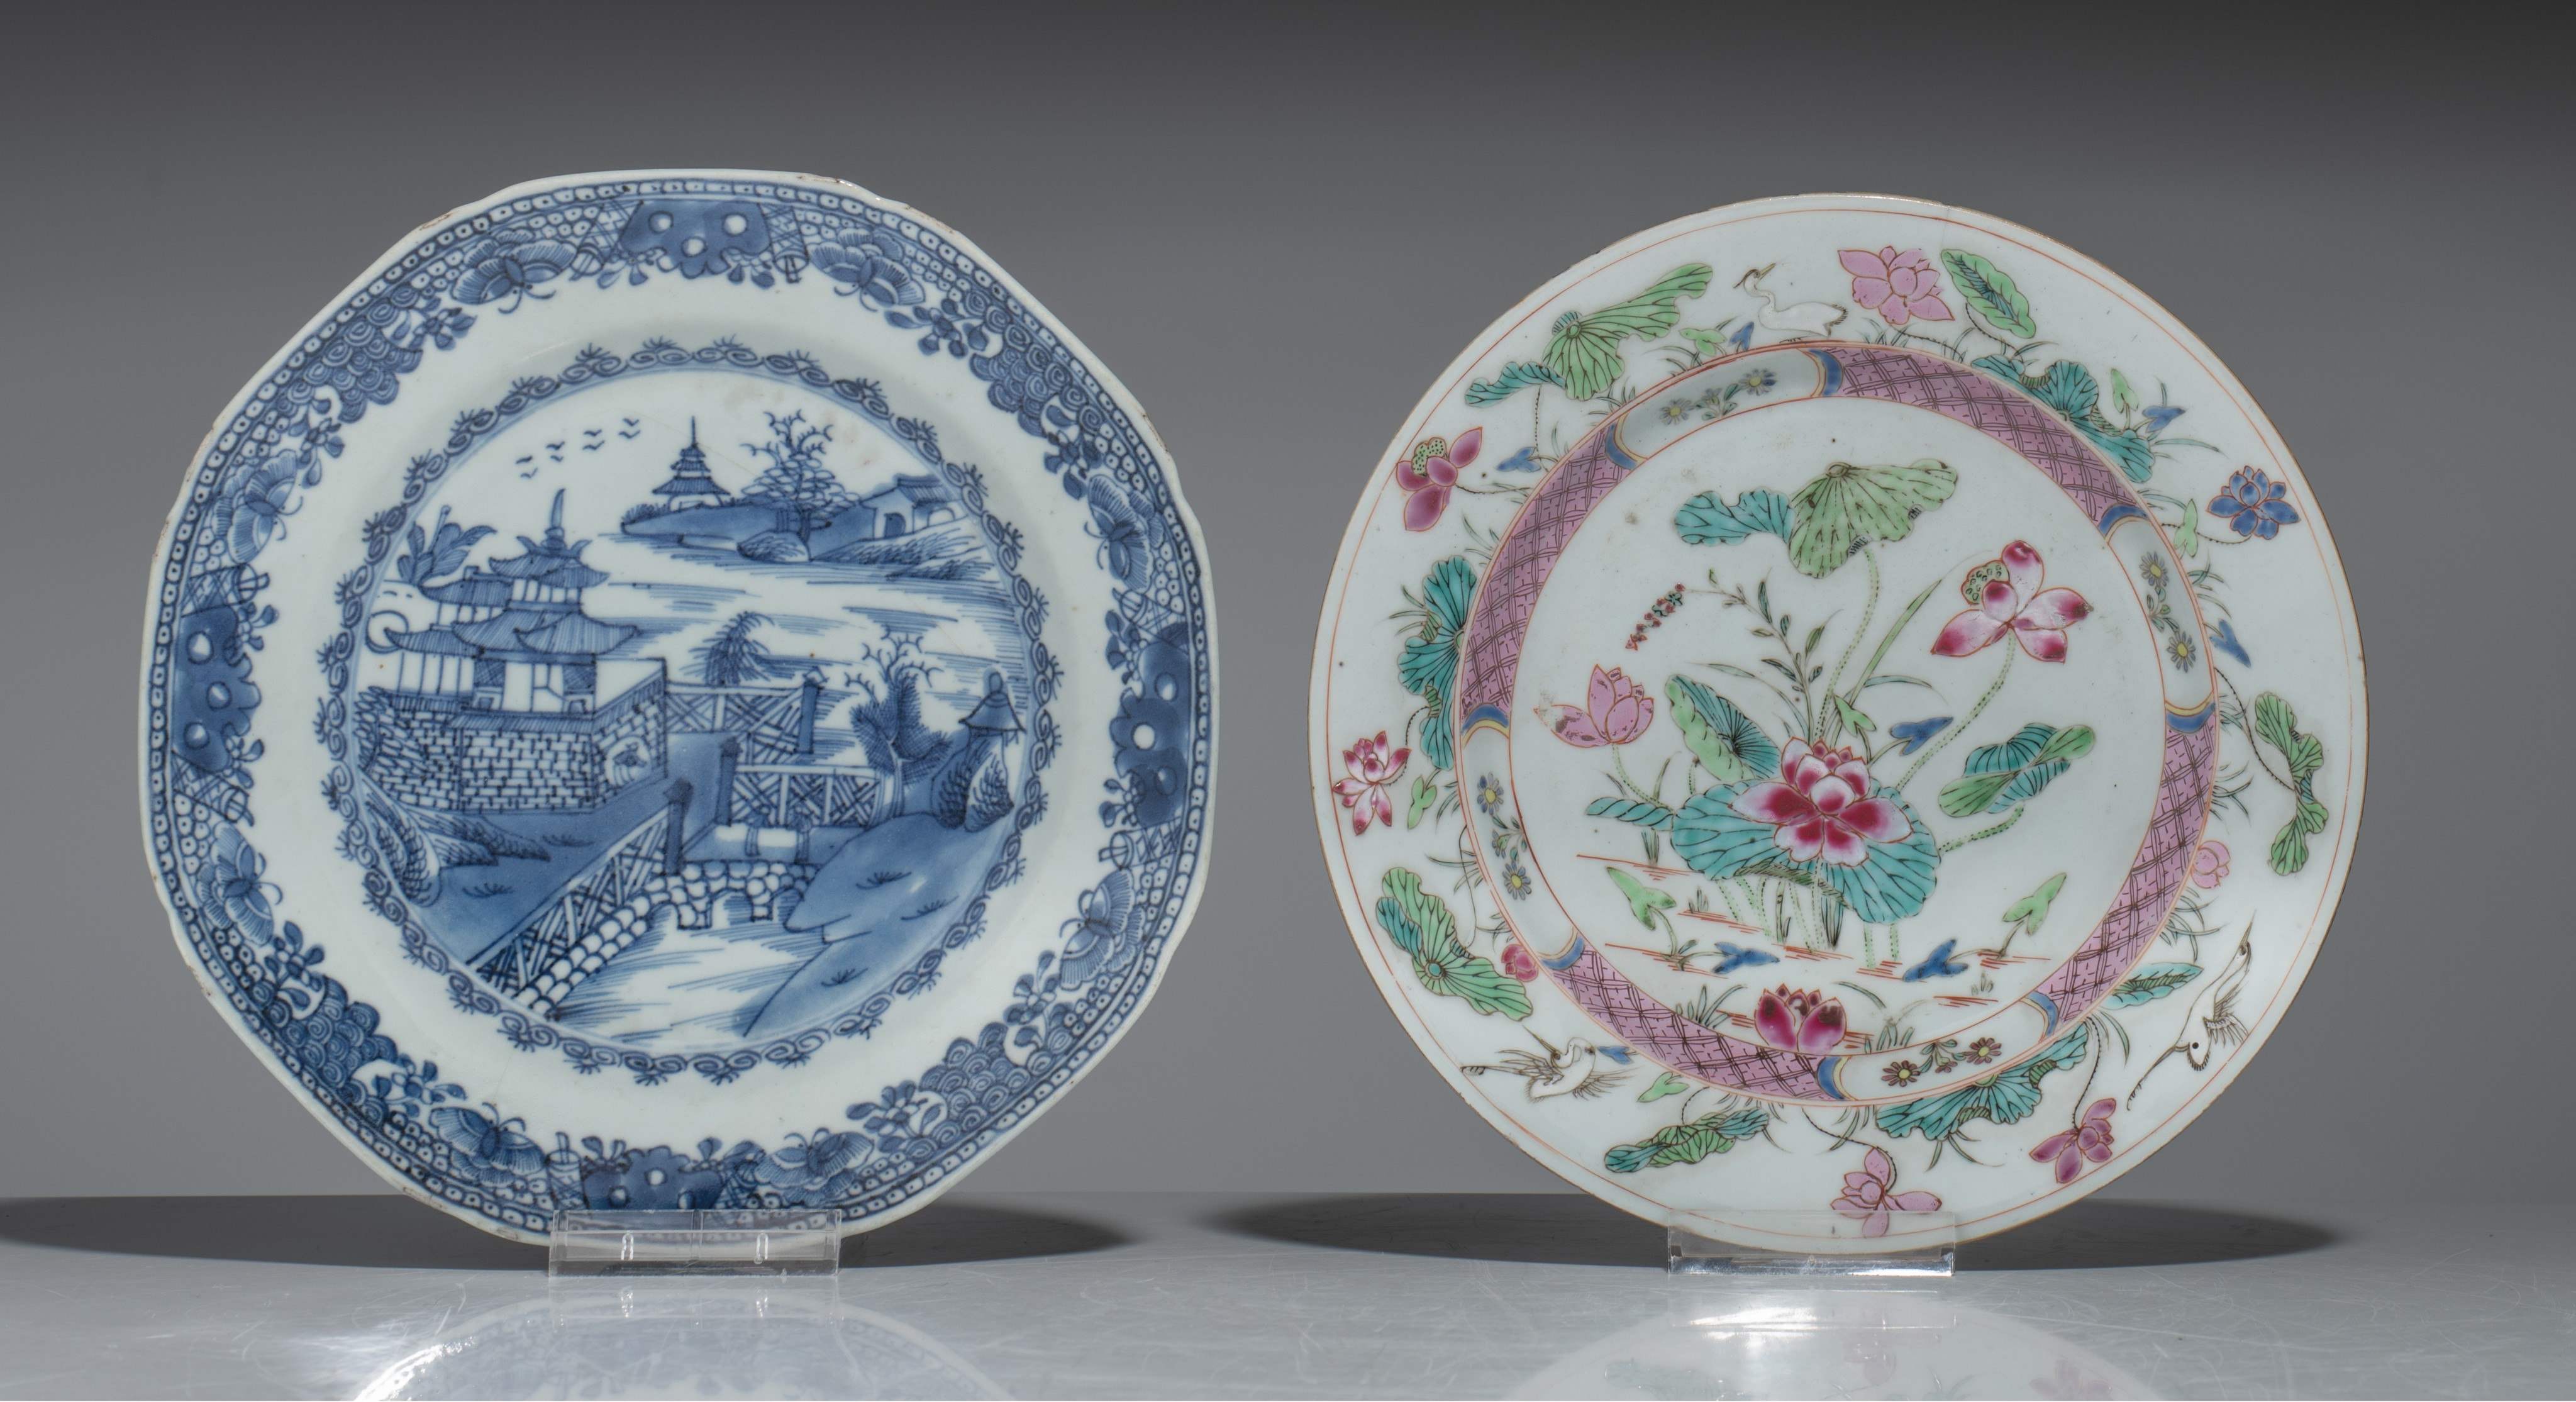 A collection of various Chinese export porcelain plates, Wanli, Qianlong and Guangxu period, ø 22 - - Image 10 of 11